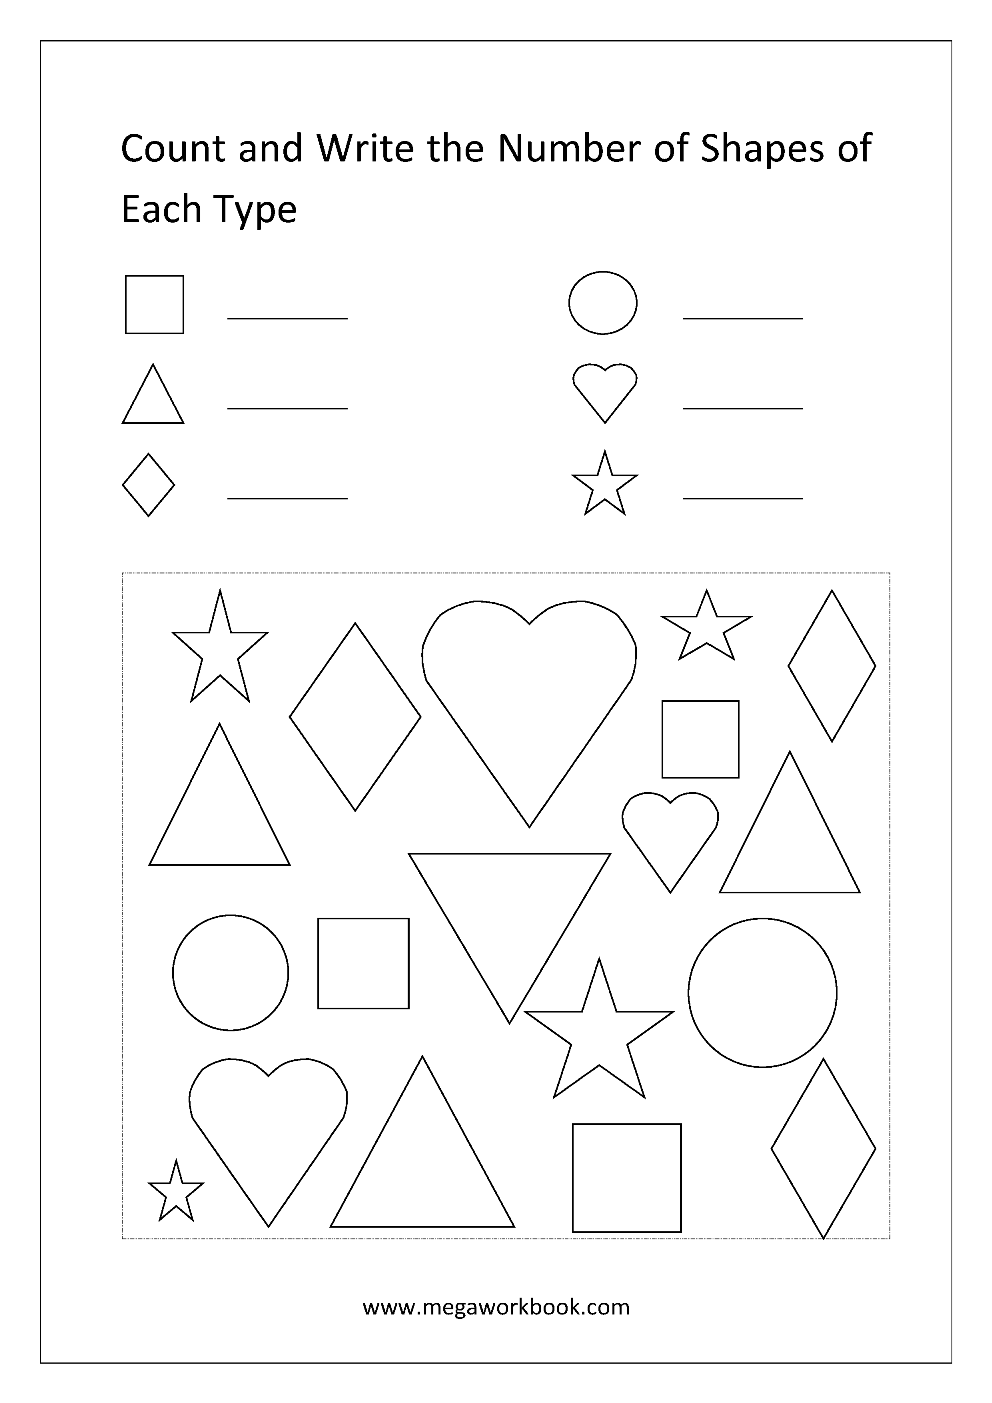 free printable shapes worksheets for preschool kindergarten counting the shapes identifying the shapes megaworkbook